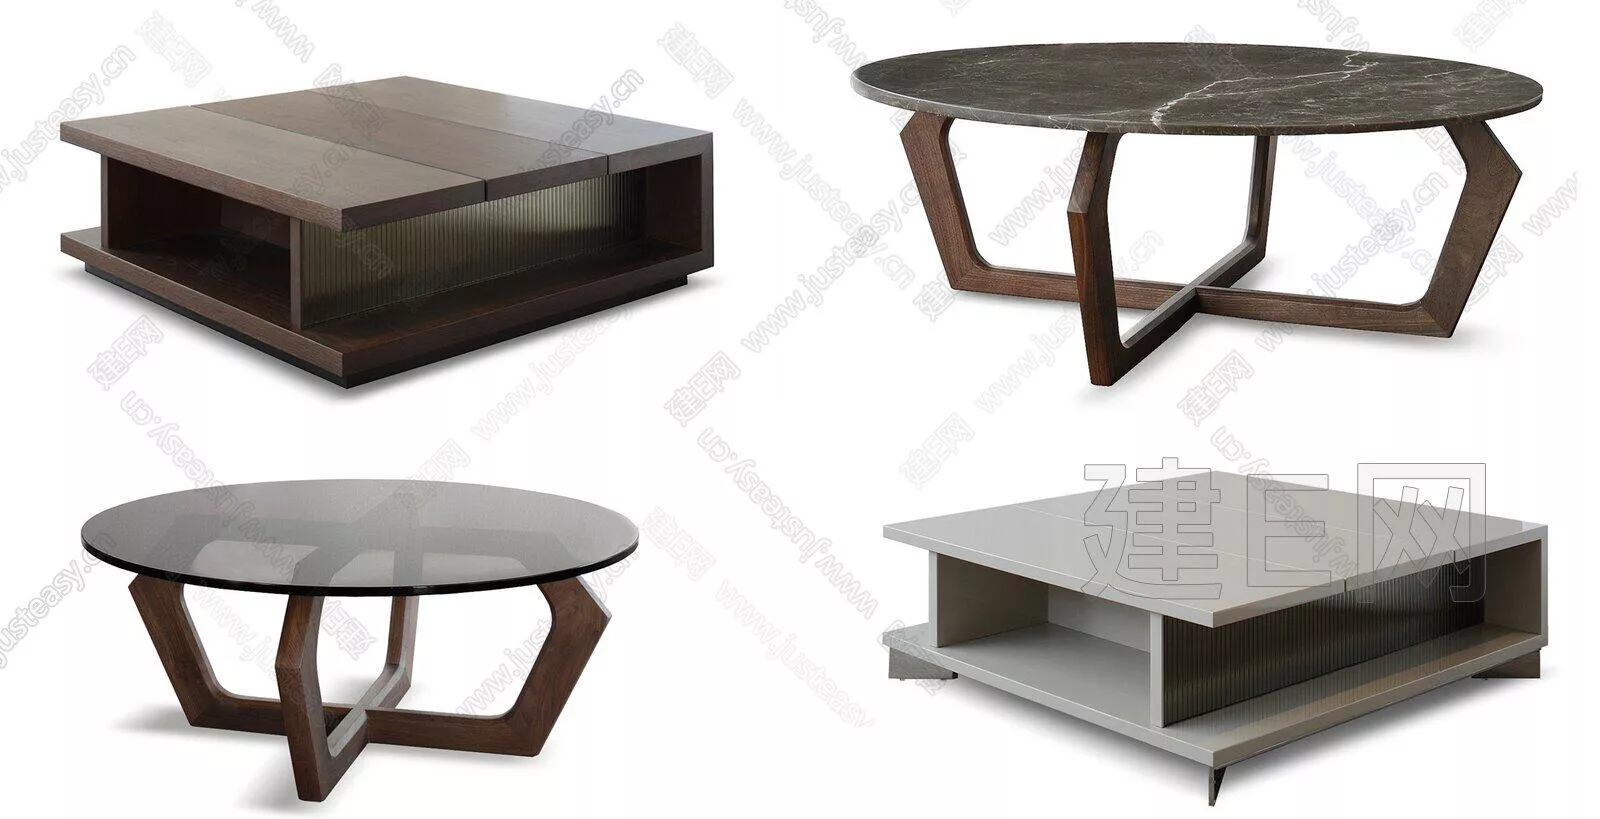 MODERN COFFEE TABLE - SKETCHUP 3D MODEL - ENSCAPE - 112217566